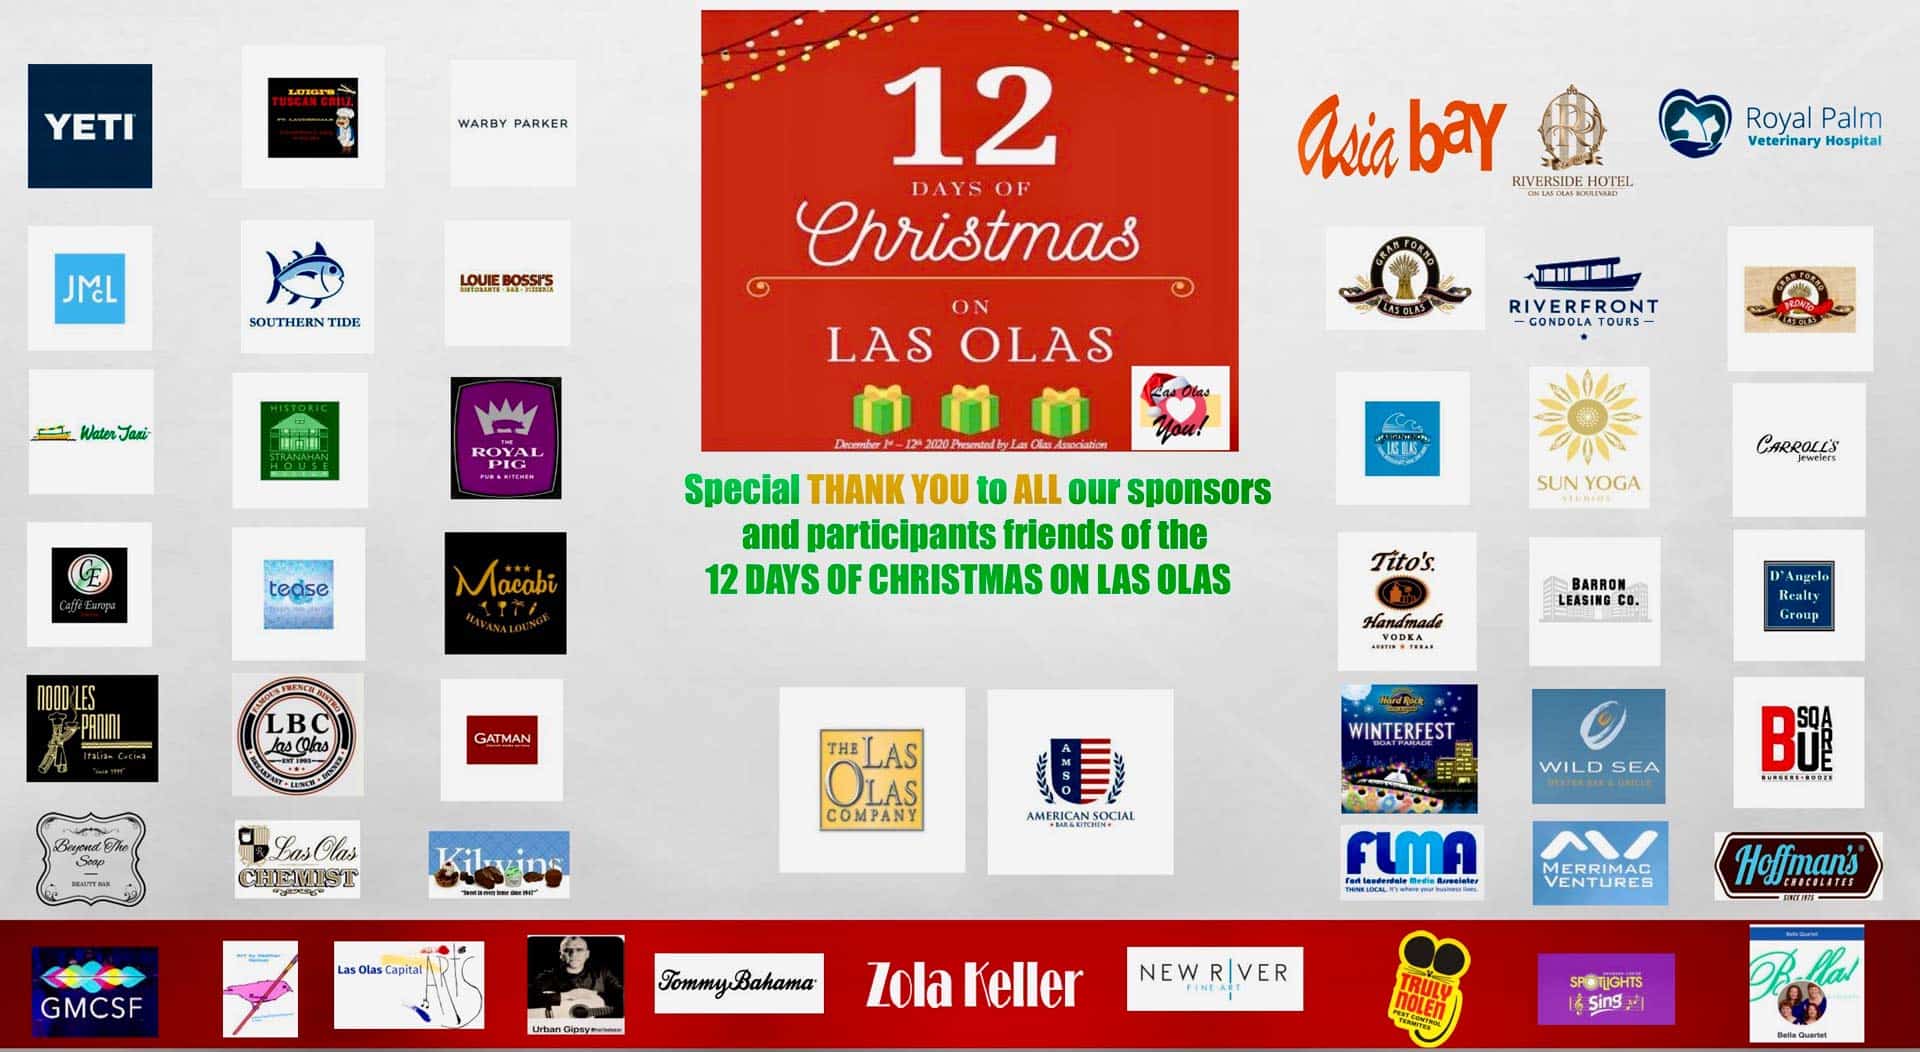 Thank You To All Our Sponsors - 12 Days of Christmas on Las Olas